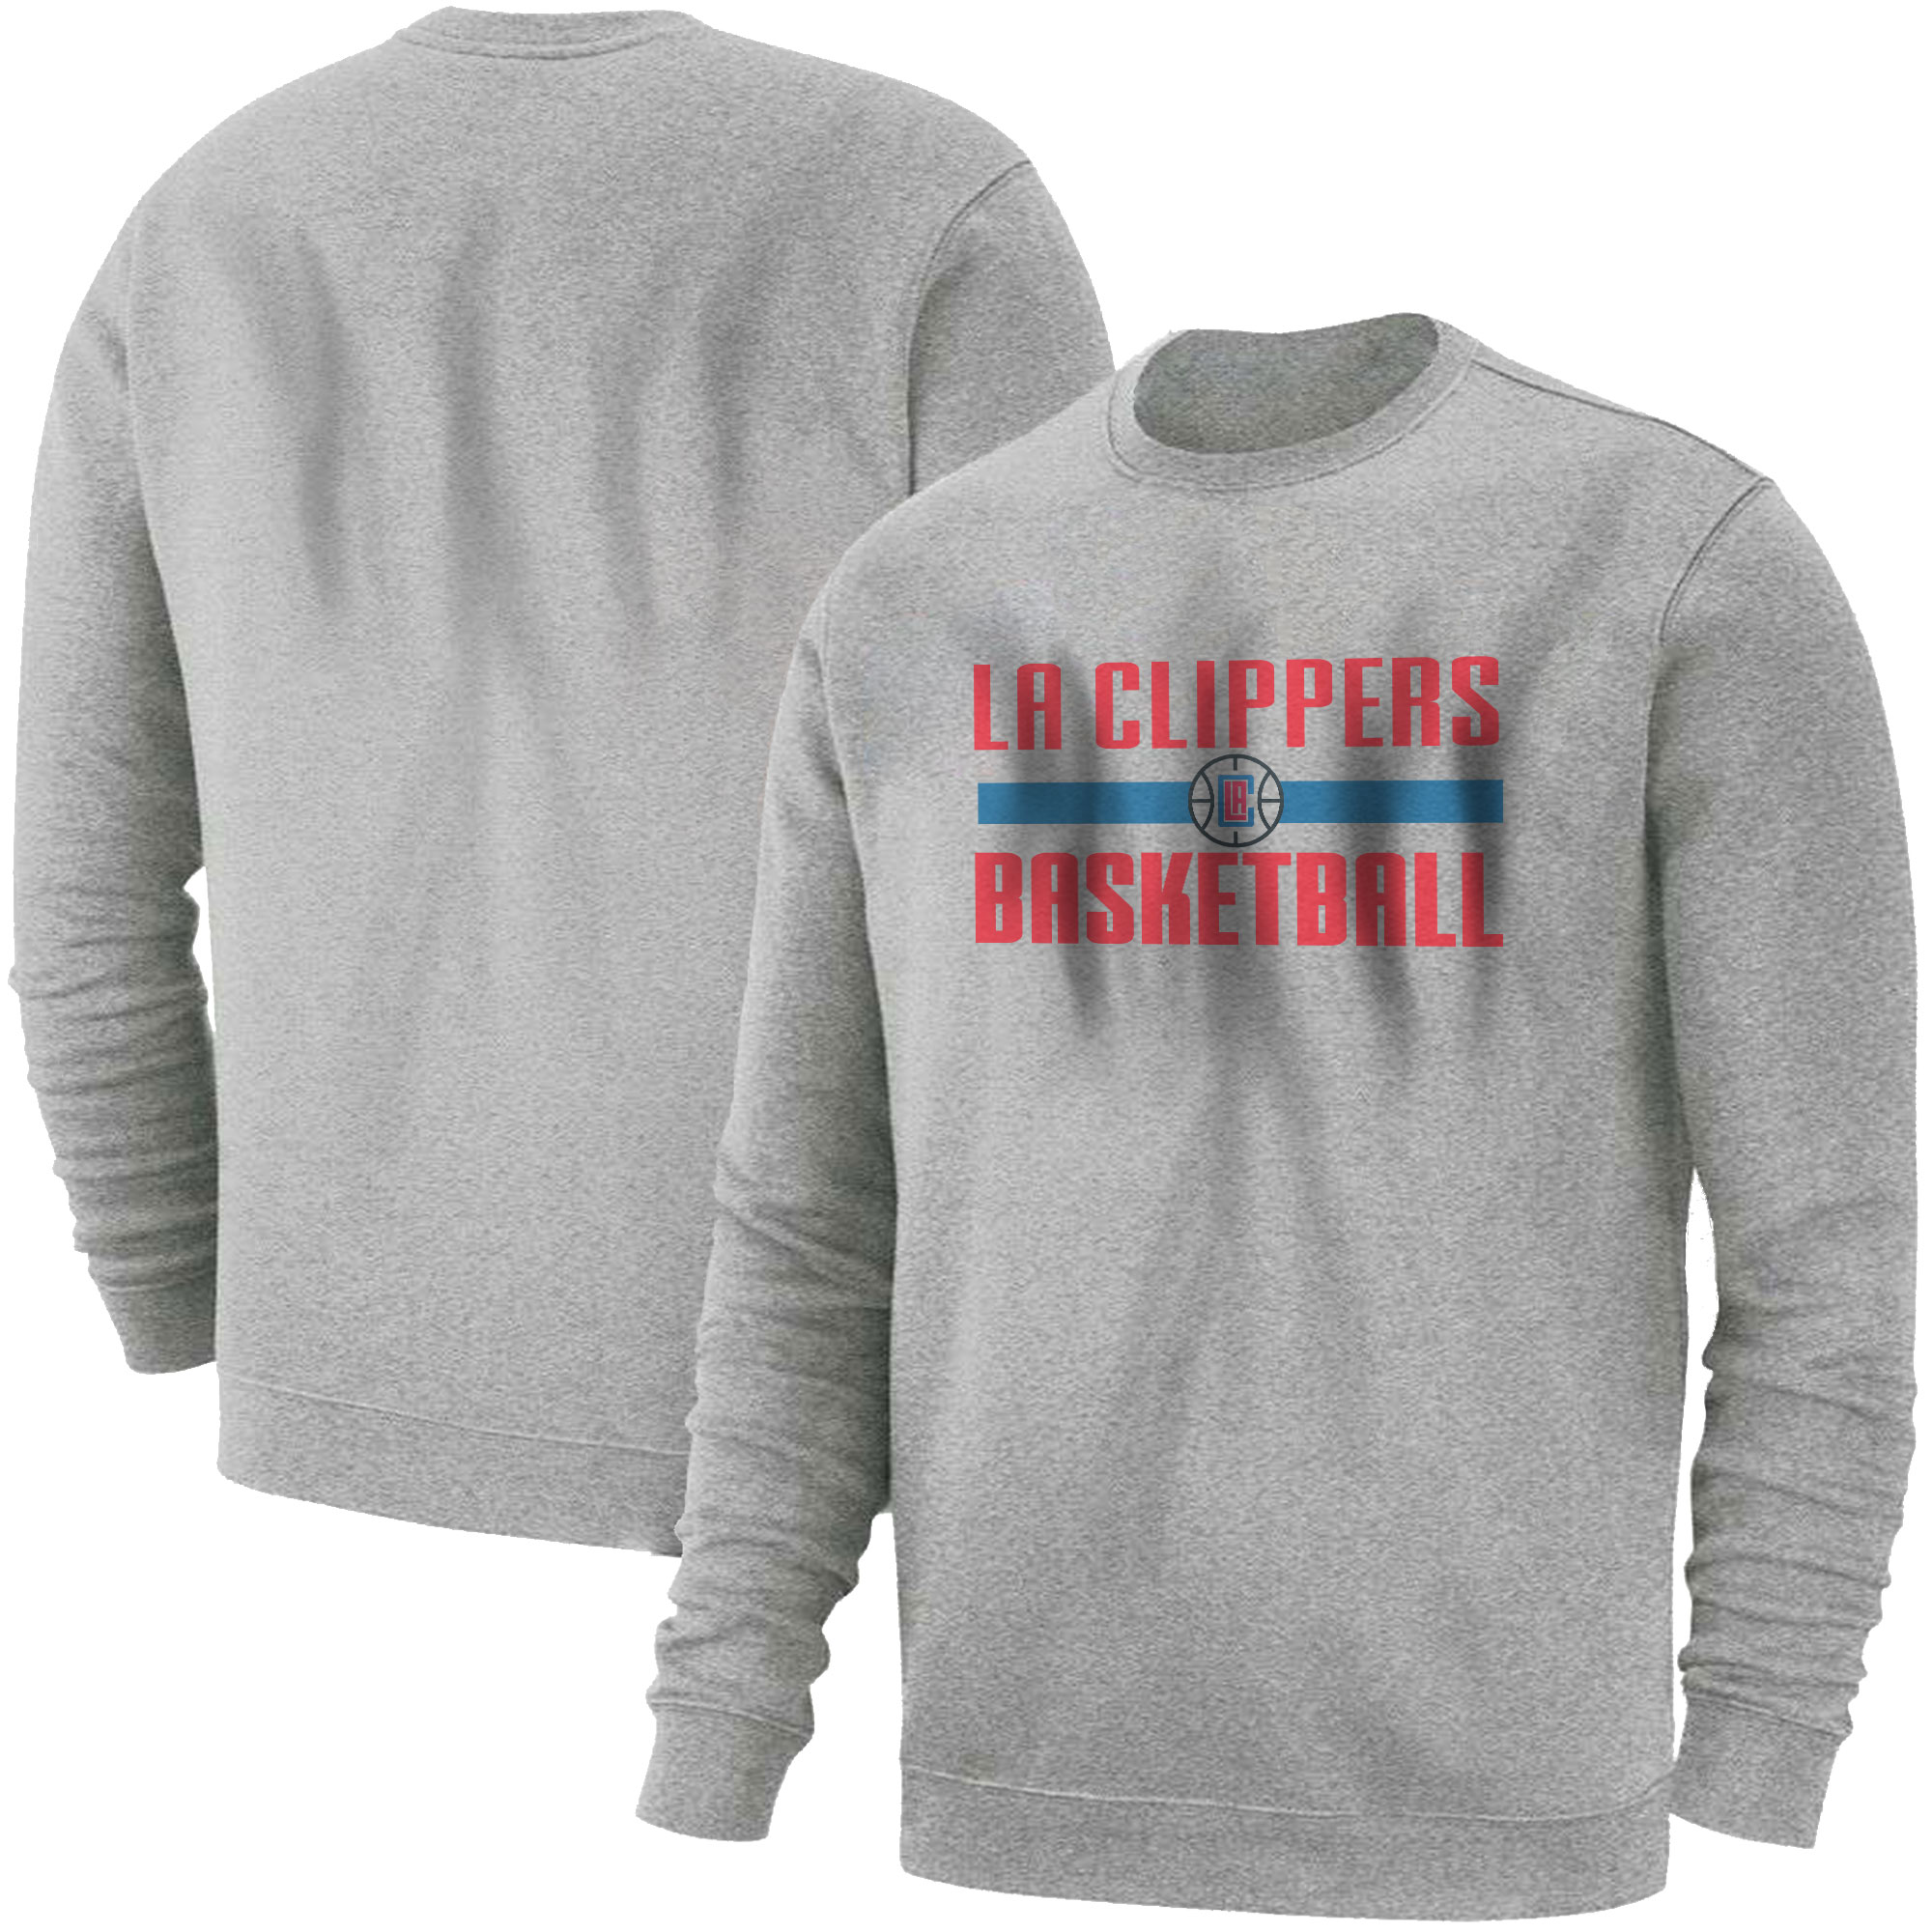 L.A. Clippers Basketball Basic (BSC-GRY-708)